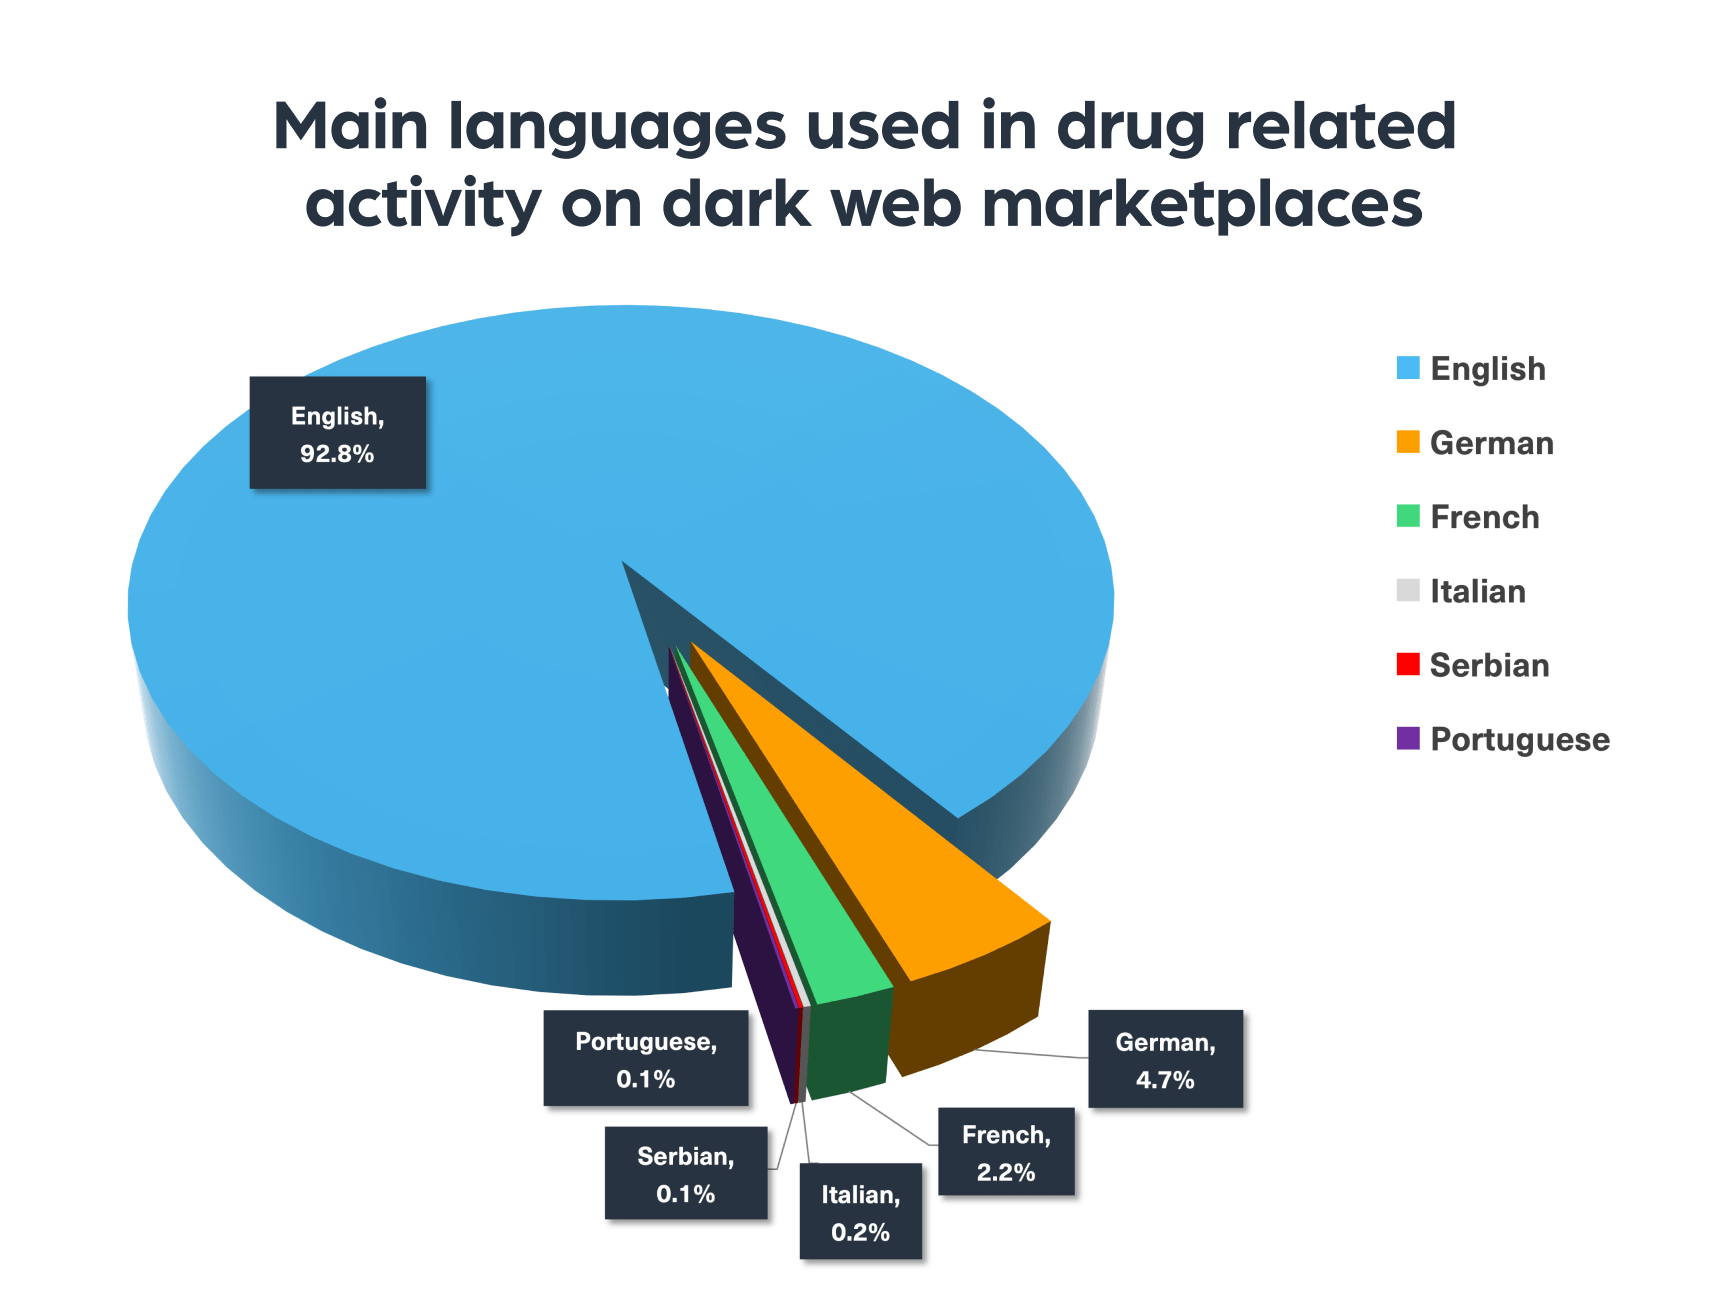 The main languages used in drug-related activity on dark web marketplaces